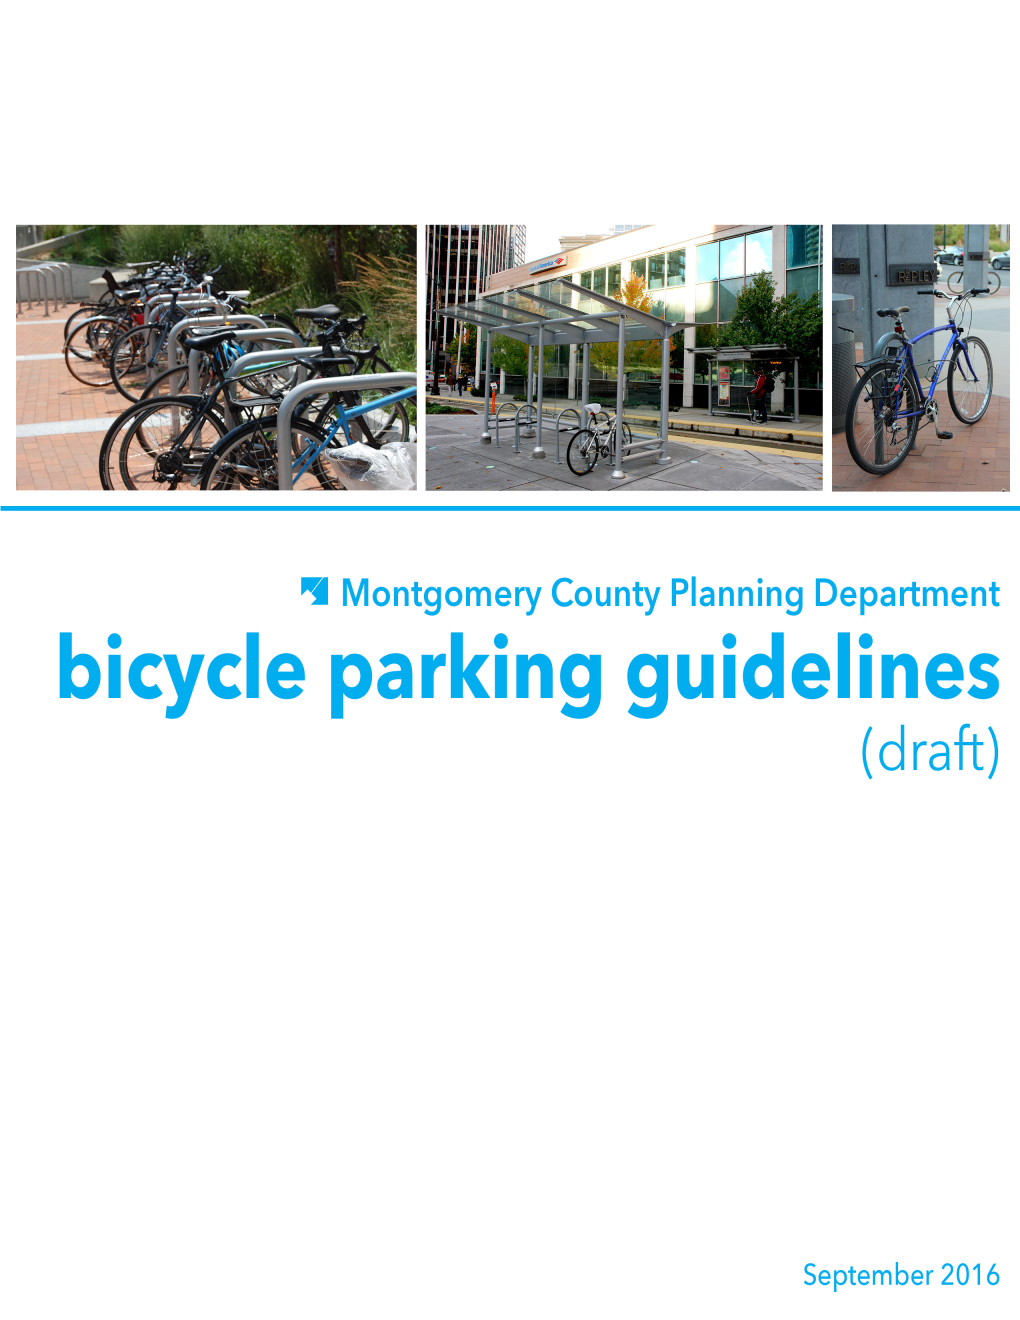 3.2 Bicycle Parking Requirements